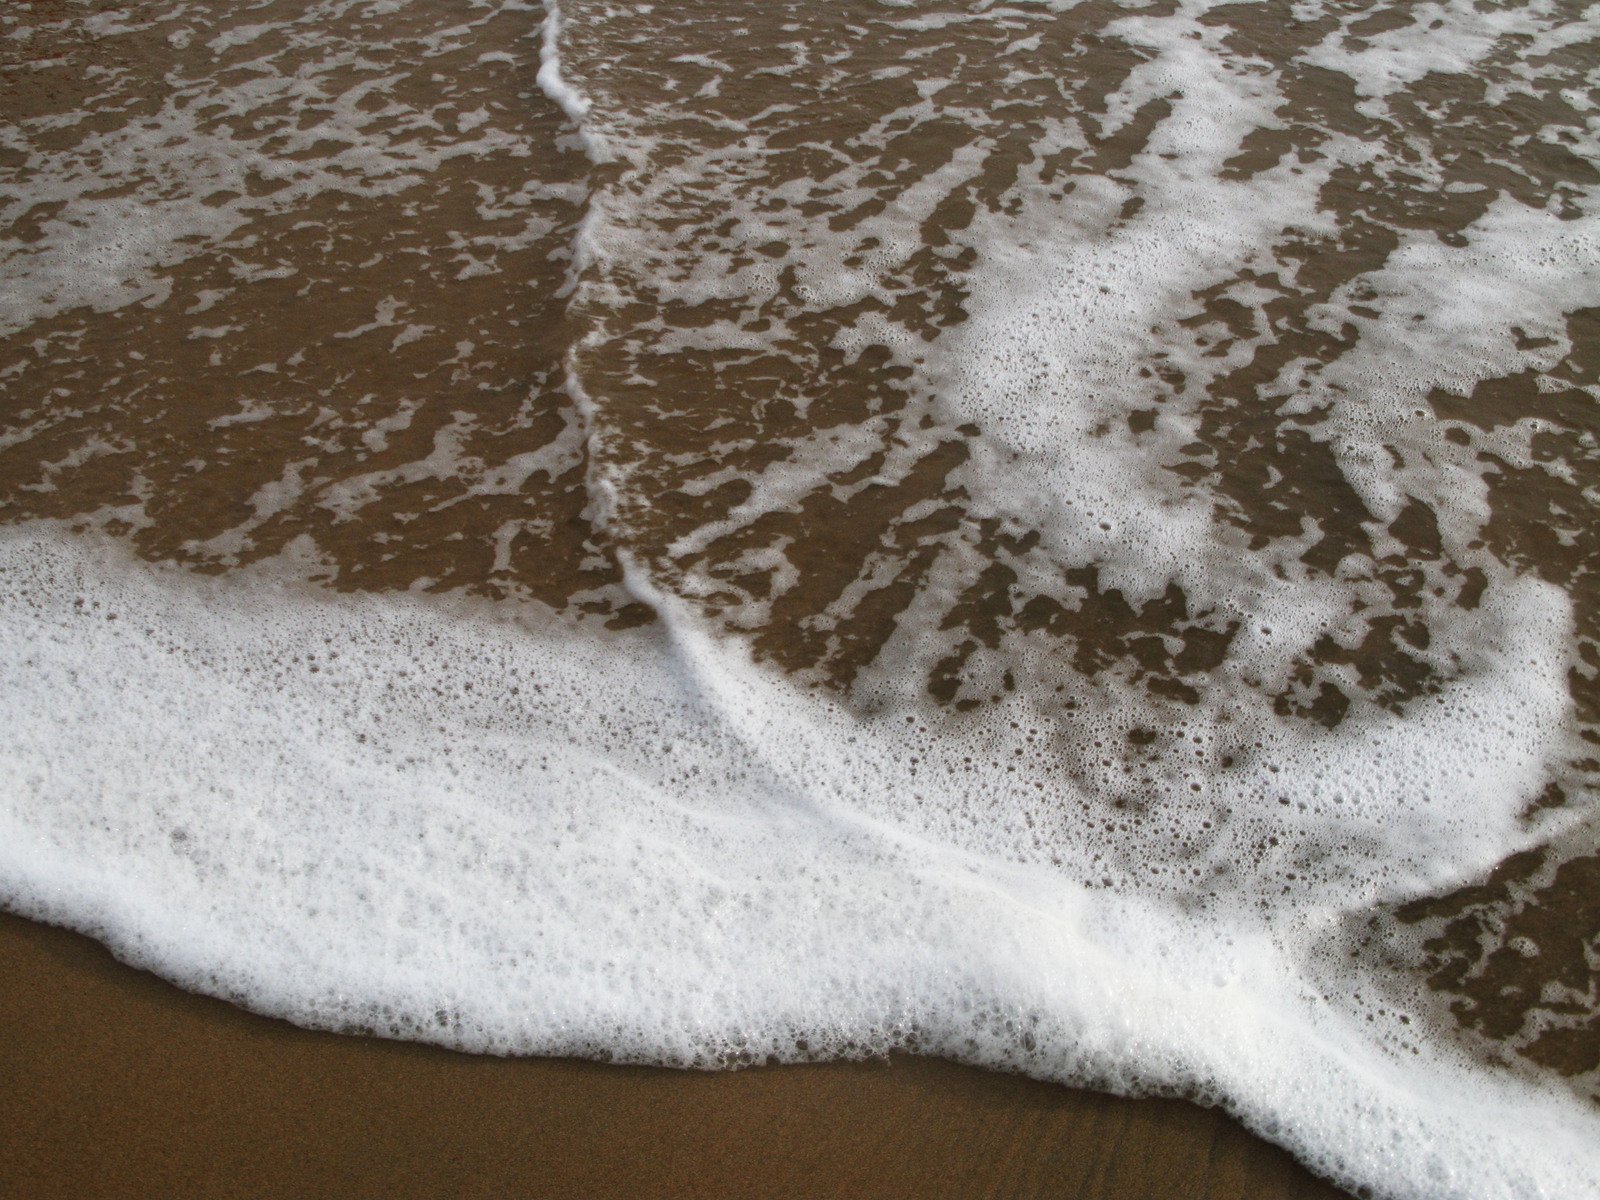 a wave coming in to the shore with white foam